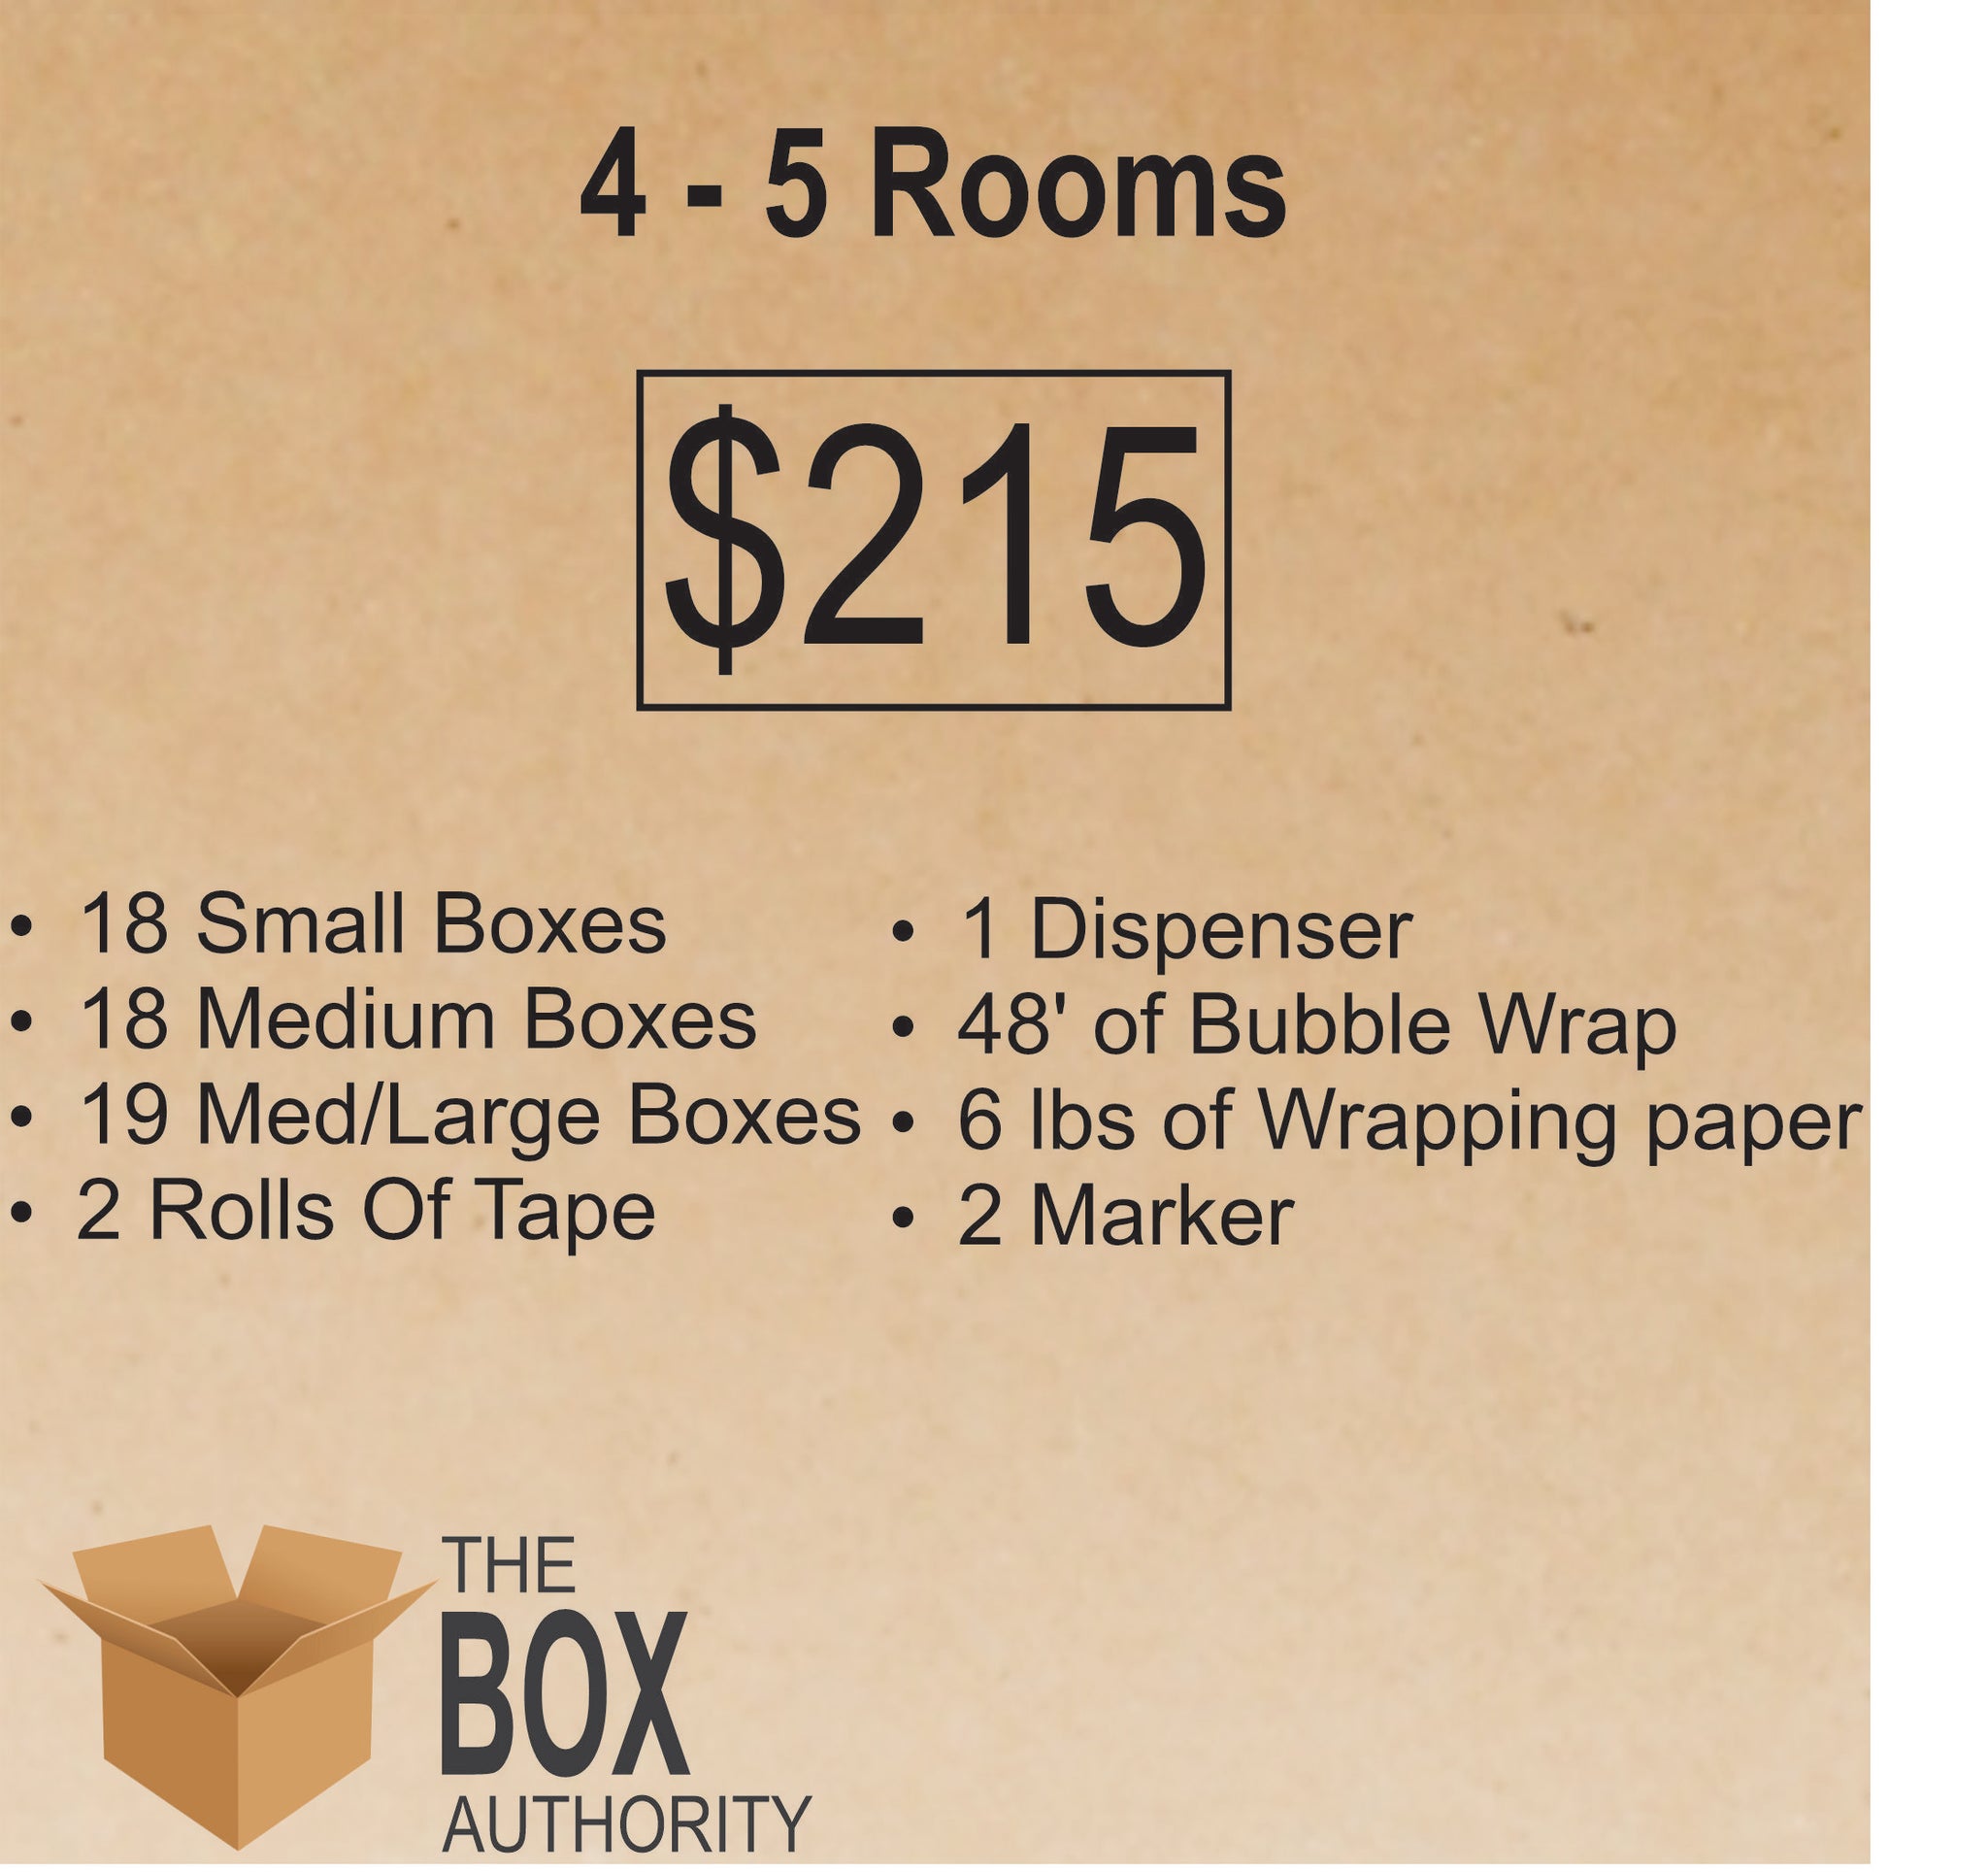 4 Rooms - 5 Rooms Moving Kit